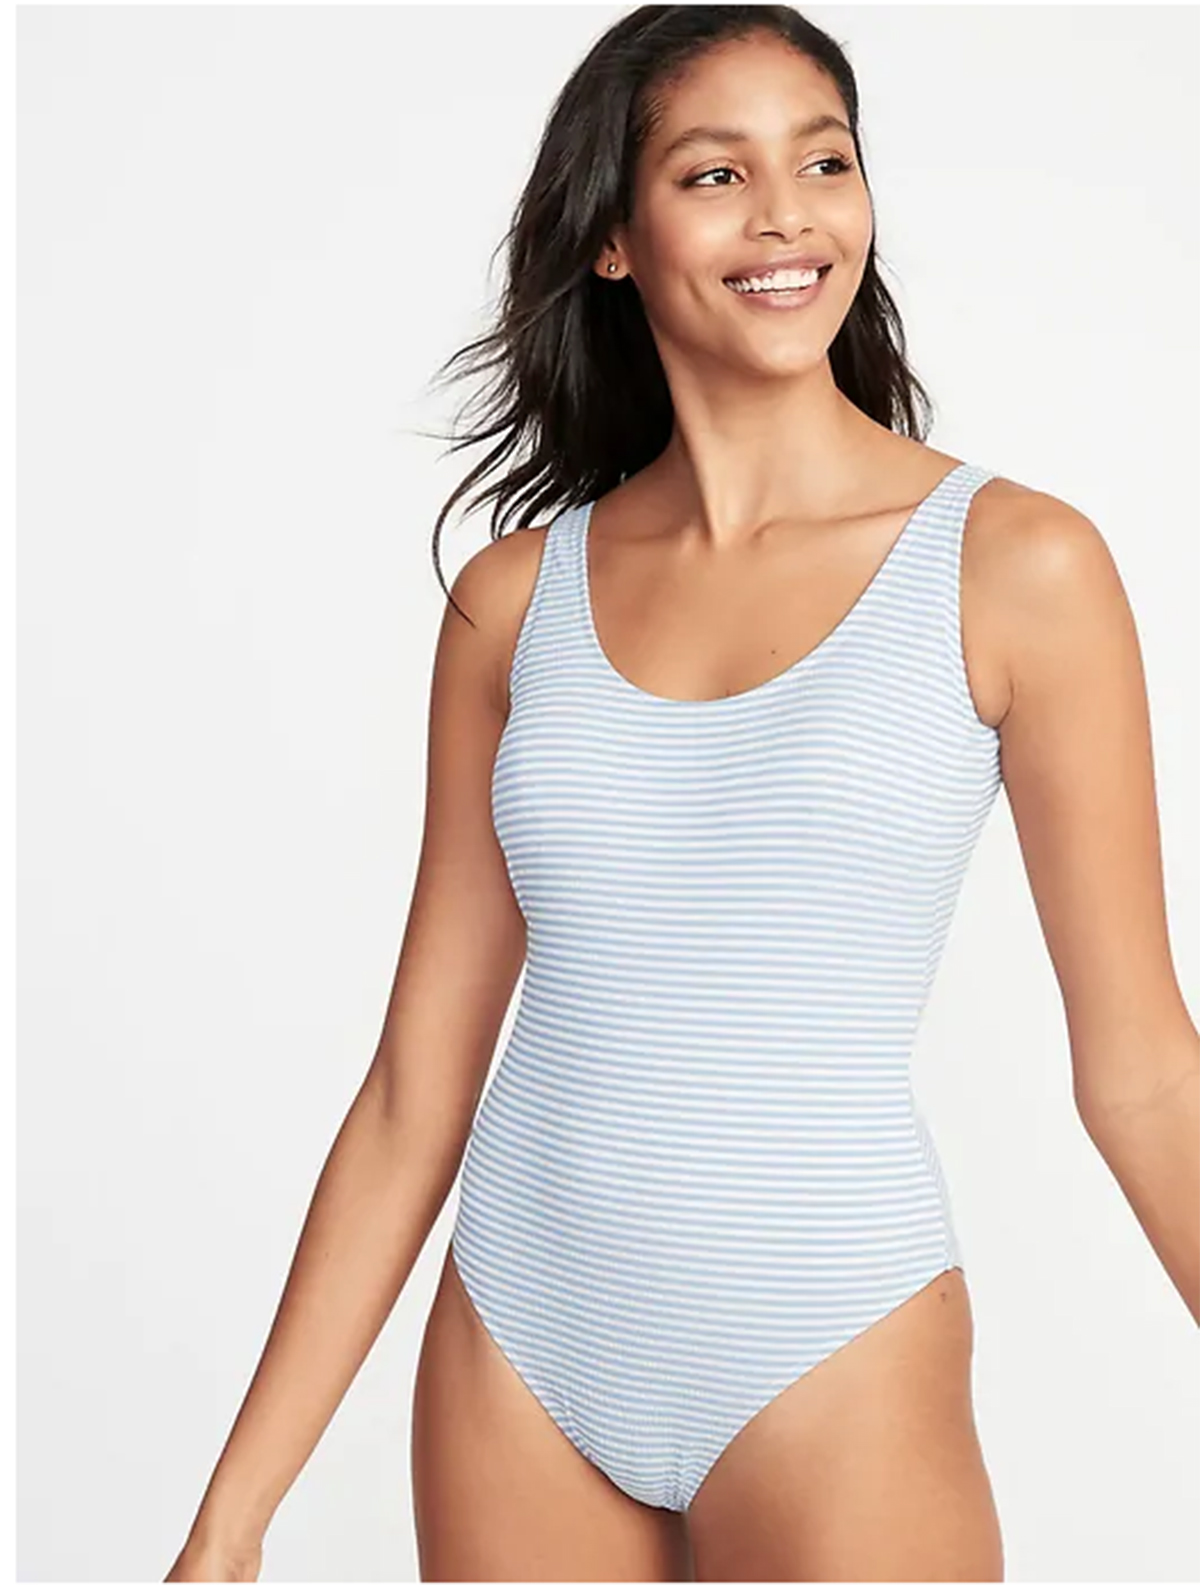 old navy one piece bathing suits womens The length is very short and also s...